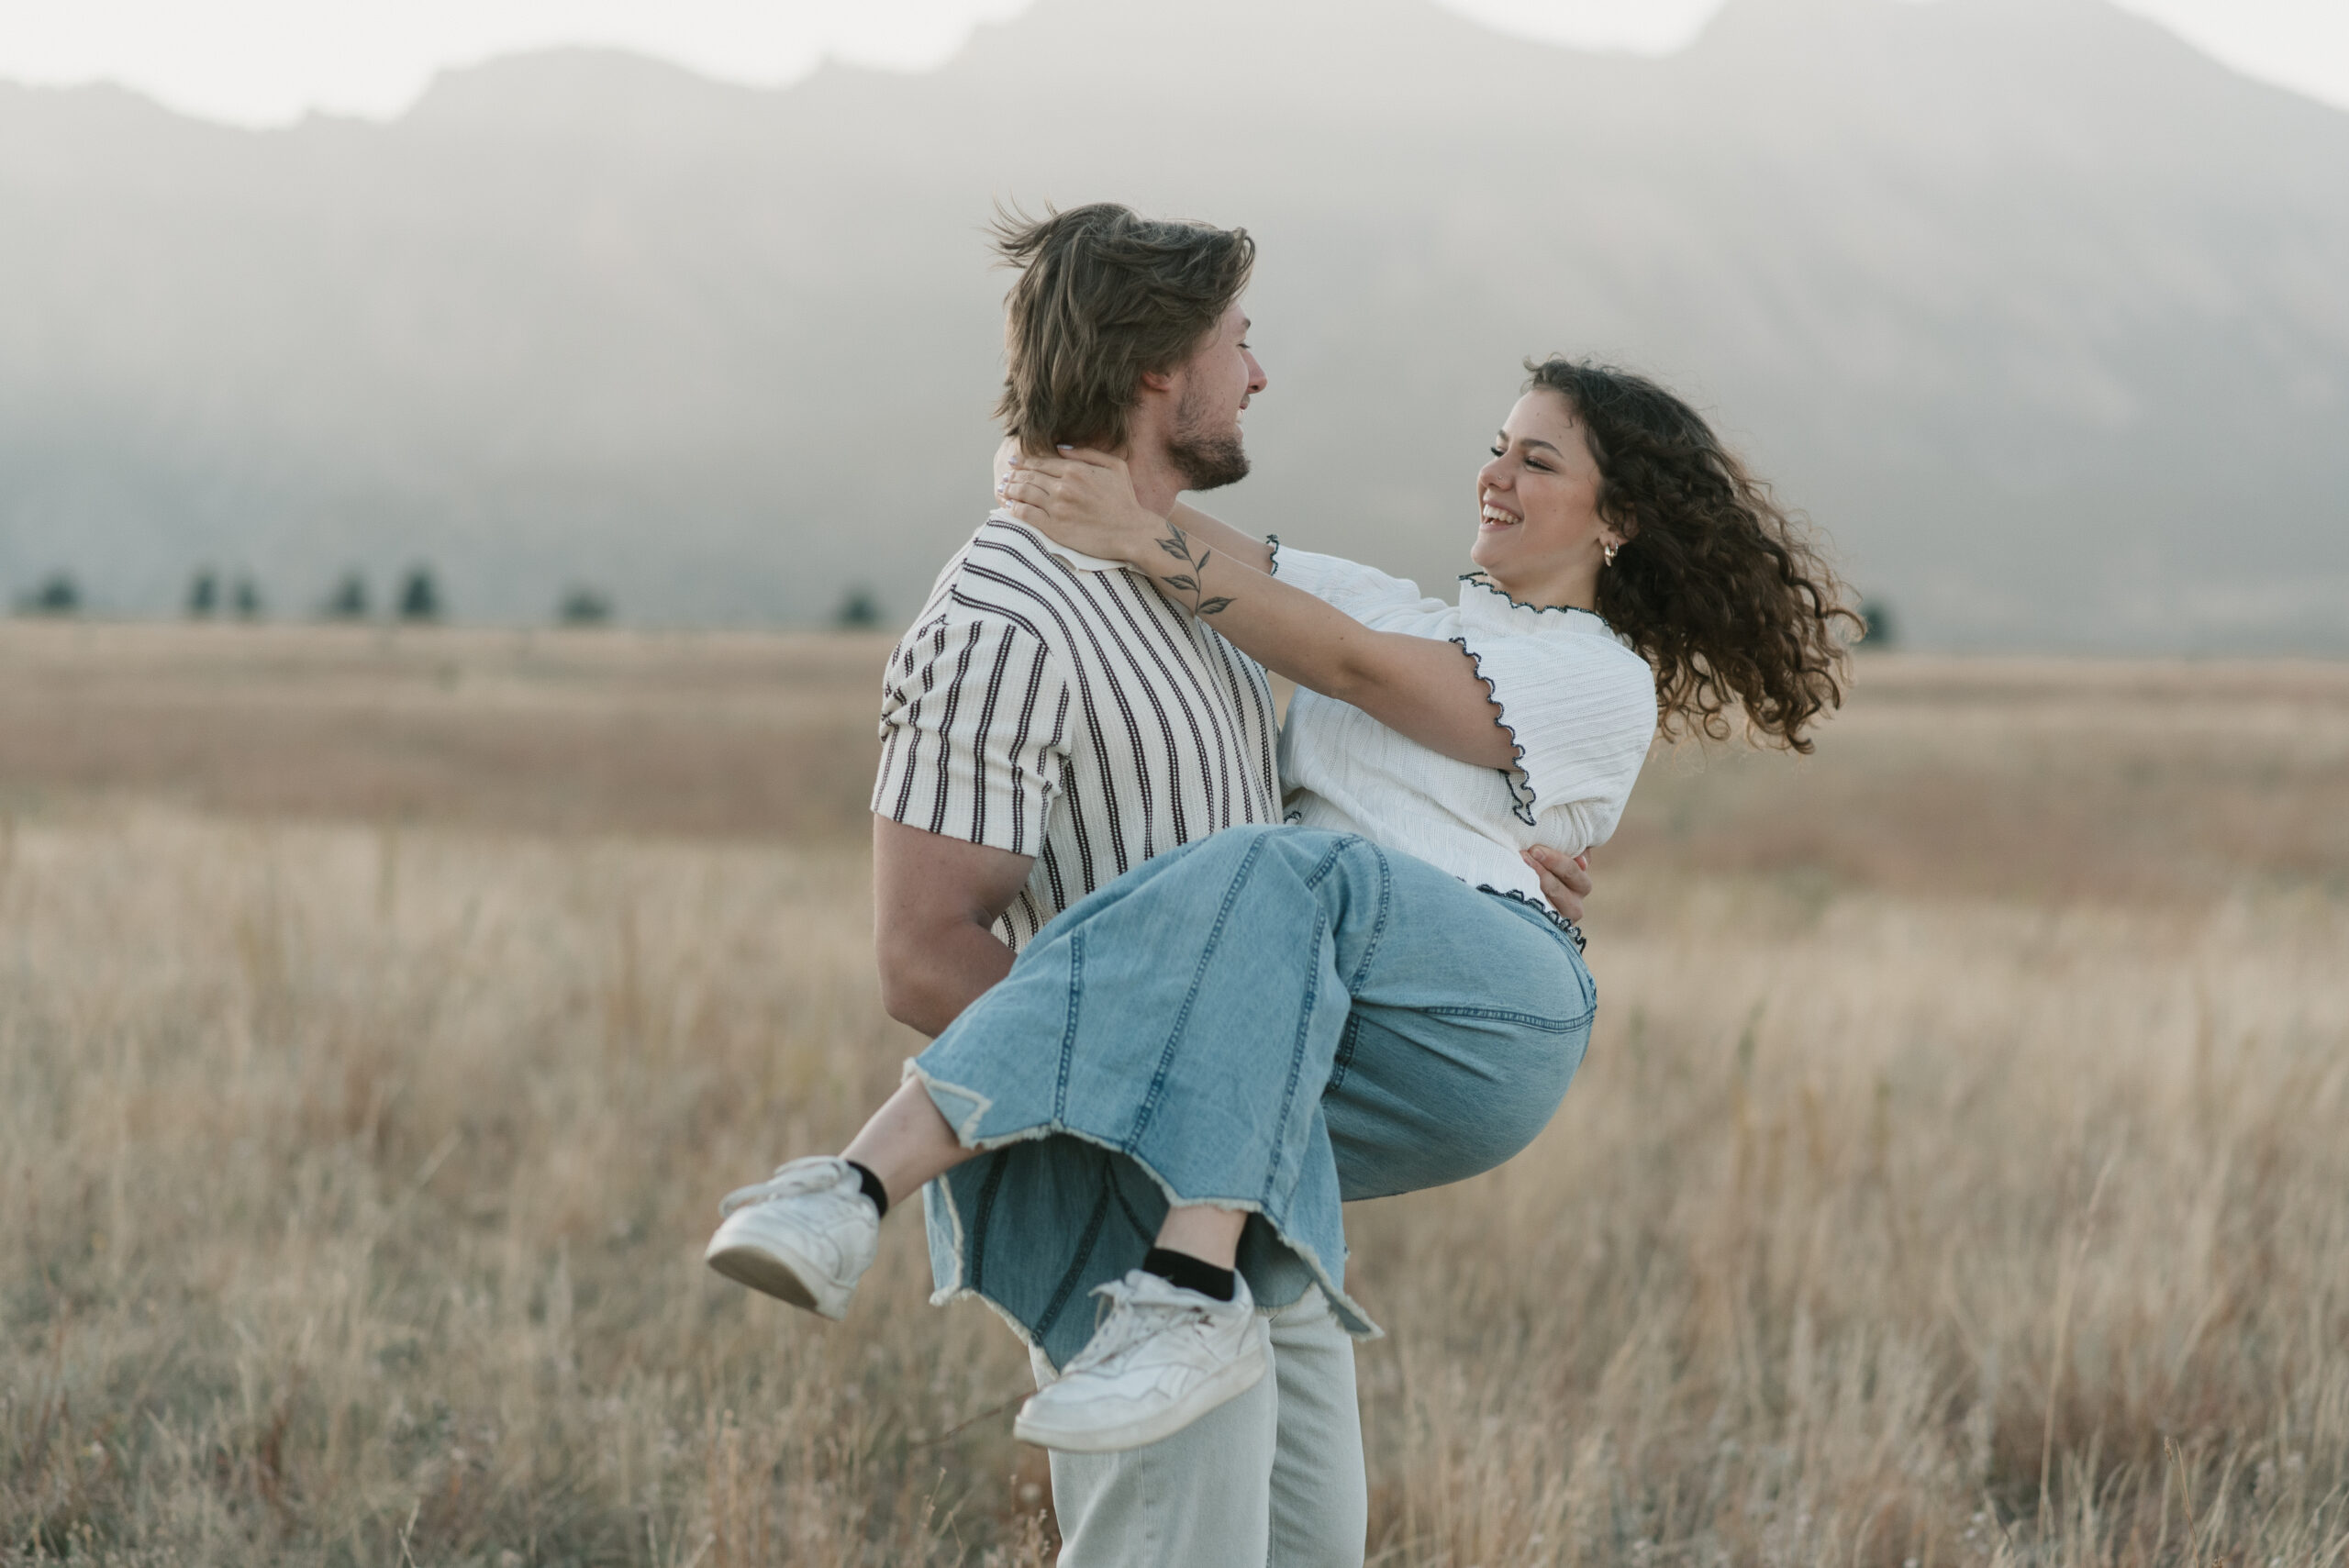 a man carrying a woman through a grass field during their couples photoshoot 